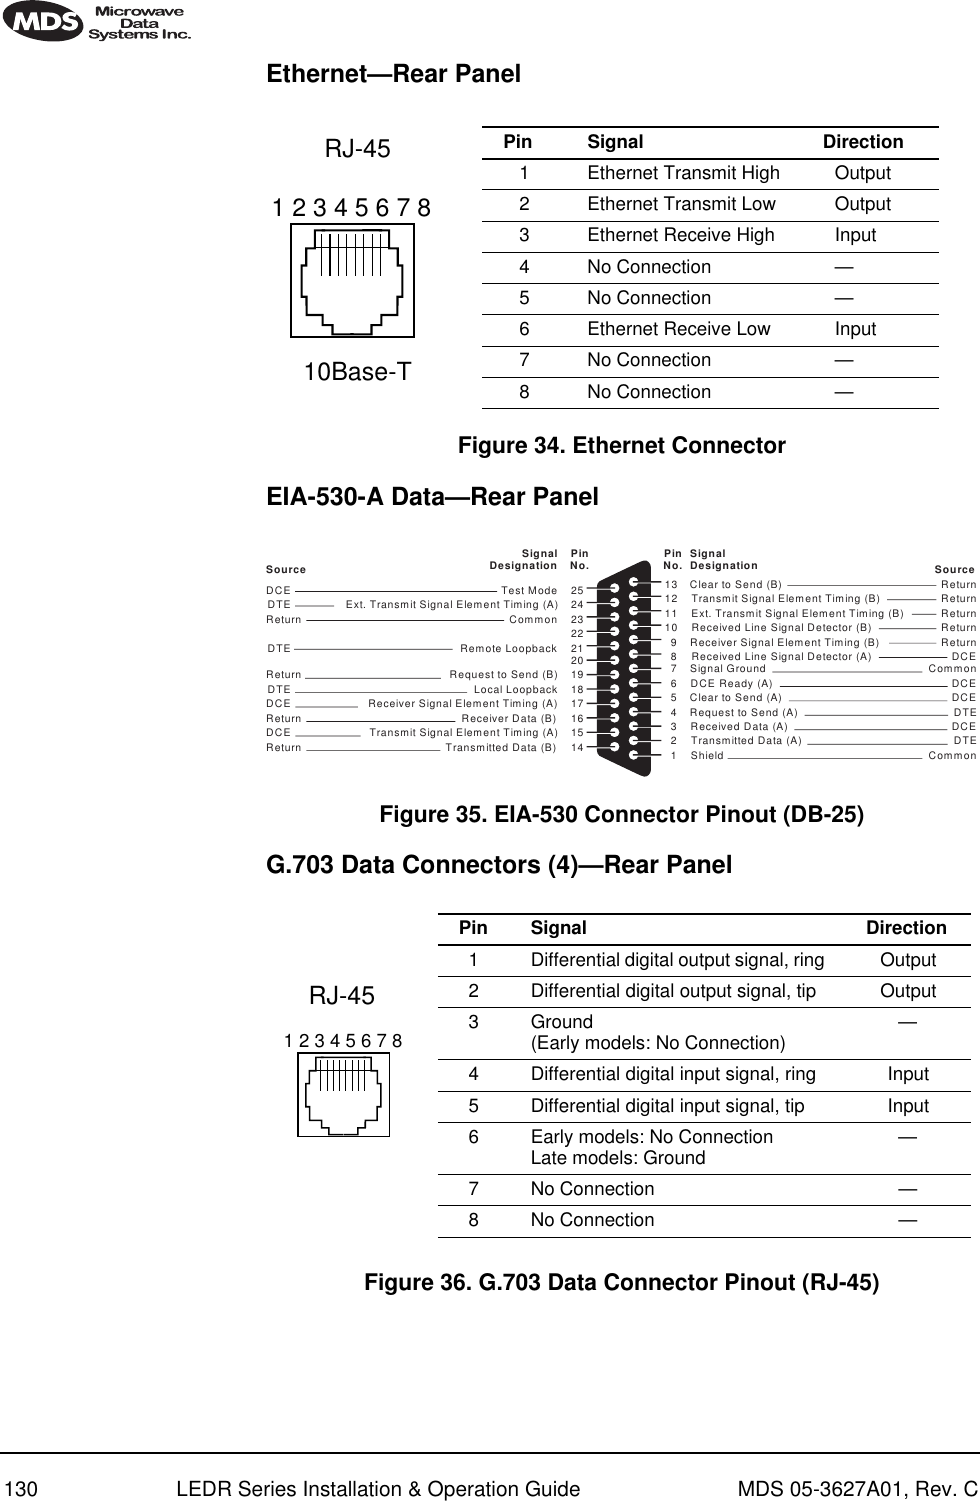 130 LEDR Series Installation &amp; Operation Guide MDS 05-3627A01, Rev. CEthernet—Rear Panel Invisible place holderFigure 34. Ethernet Connector EIA-530-A Data—Rear Panel Invisible place holderFigure 35. EIA-530 Connector Pinout (DB-25)G.703 Data Connectors (4)—Rear PanelInvisible place holderFigure 36. G.703 Data Connector Pinout (RJ-45)1 2 3 4 5 6 7 8RJ-4510Base-TPin Signal Direction1 Ethernet Transmit High Output2 Ethernet Transmit Low Output3 Ethernet Receive High Input4 No Connection —5 No Connection —6 Ethernet Receive Low Input7 No Connection —8 No Connection —Clear to Send (B)Transmit Signal Element Timing (B)Ext. Transmit Signal Element Timing (B)13121110987654321Received Line Signal Detector (B)Receiver Signal Element Timing (B)Received Line Signal Detector (A)Signal GroundDCE Ready (A)Clear to Send (A)Request to Send (A)Received Data (A)Transmitted Data (A)ShieldReturnReturnReturnReturnReturnDCECommonDCEDCEDTEDCEDTECommon252423222120191817161514Test ModeExt. Transmit Signal Element Timing (A)CommonRemote LoopbackRequest to Send (B)Local LoopbackReceiver Signal Element Timing (A)Receiver Data (B)Transmit Signal Element Timing (A)Transmitted Data (B)DCEDTEReturnDTEReturnDTEDCEReturnDCEReturnSourceSignalDesignation PinNo. PinNo. SignalDesignation SourcePin Signal  Direction1 Differential digital output signal, ring Output2 Differential digital output signal, tip Output3 Ground(Early models: No Connection) —4 Differential digital input signal, ring Input5 Differential digital input signal, tip Input6 Early models: No ConnectionLate models: Ground —7 No Connection —8 No Connection —1 2 3 4 5 6 7 8RJ-45